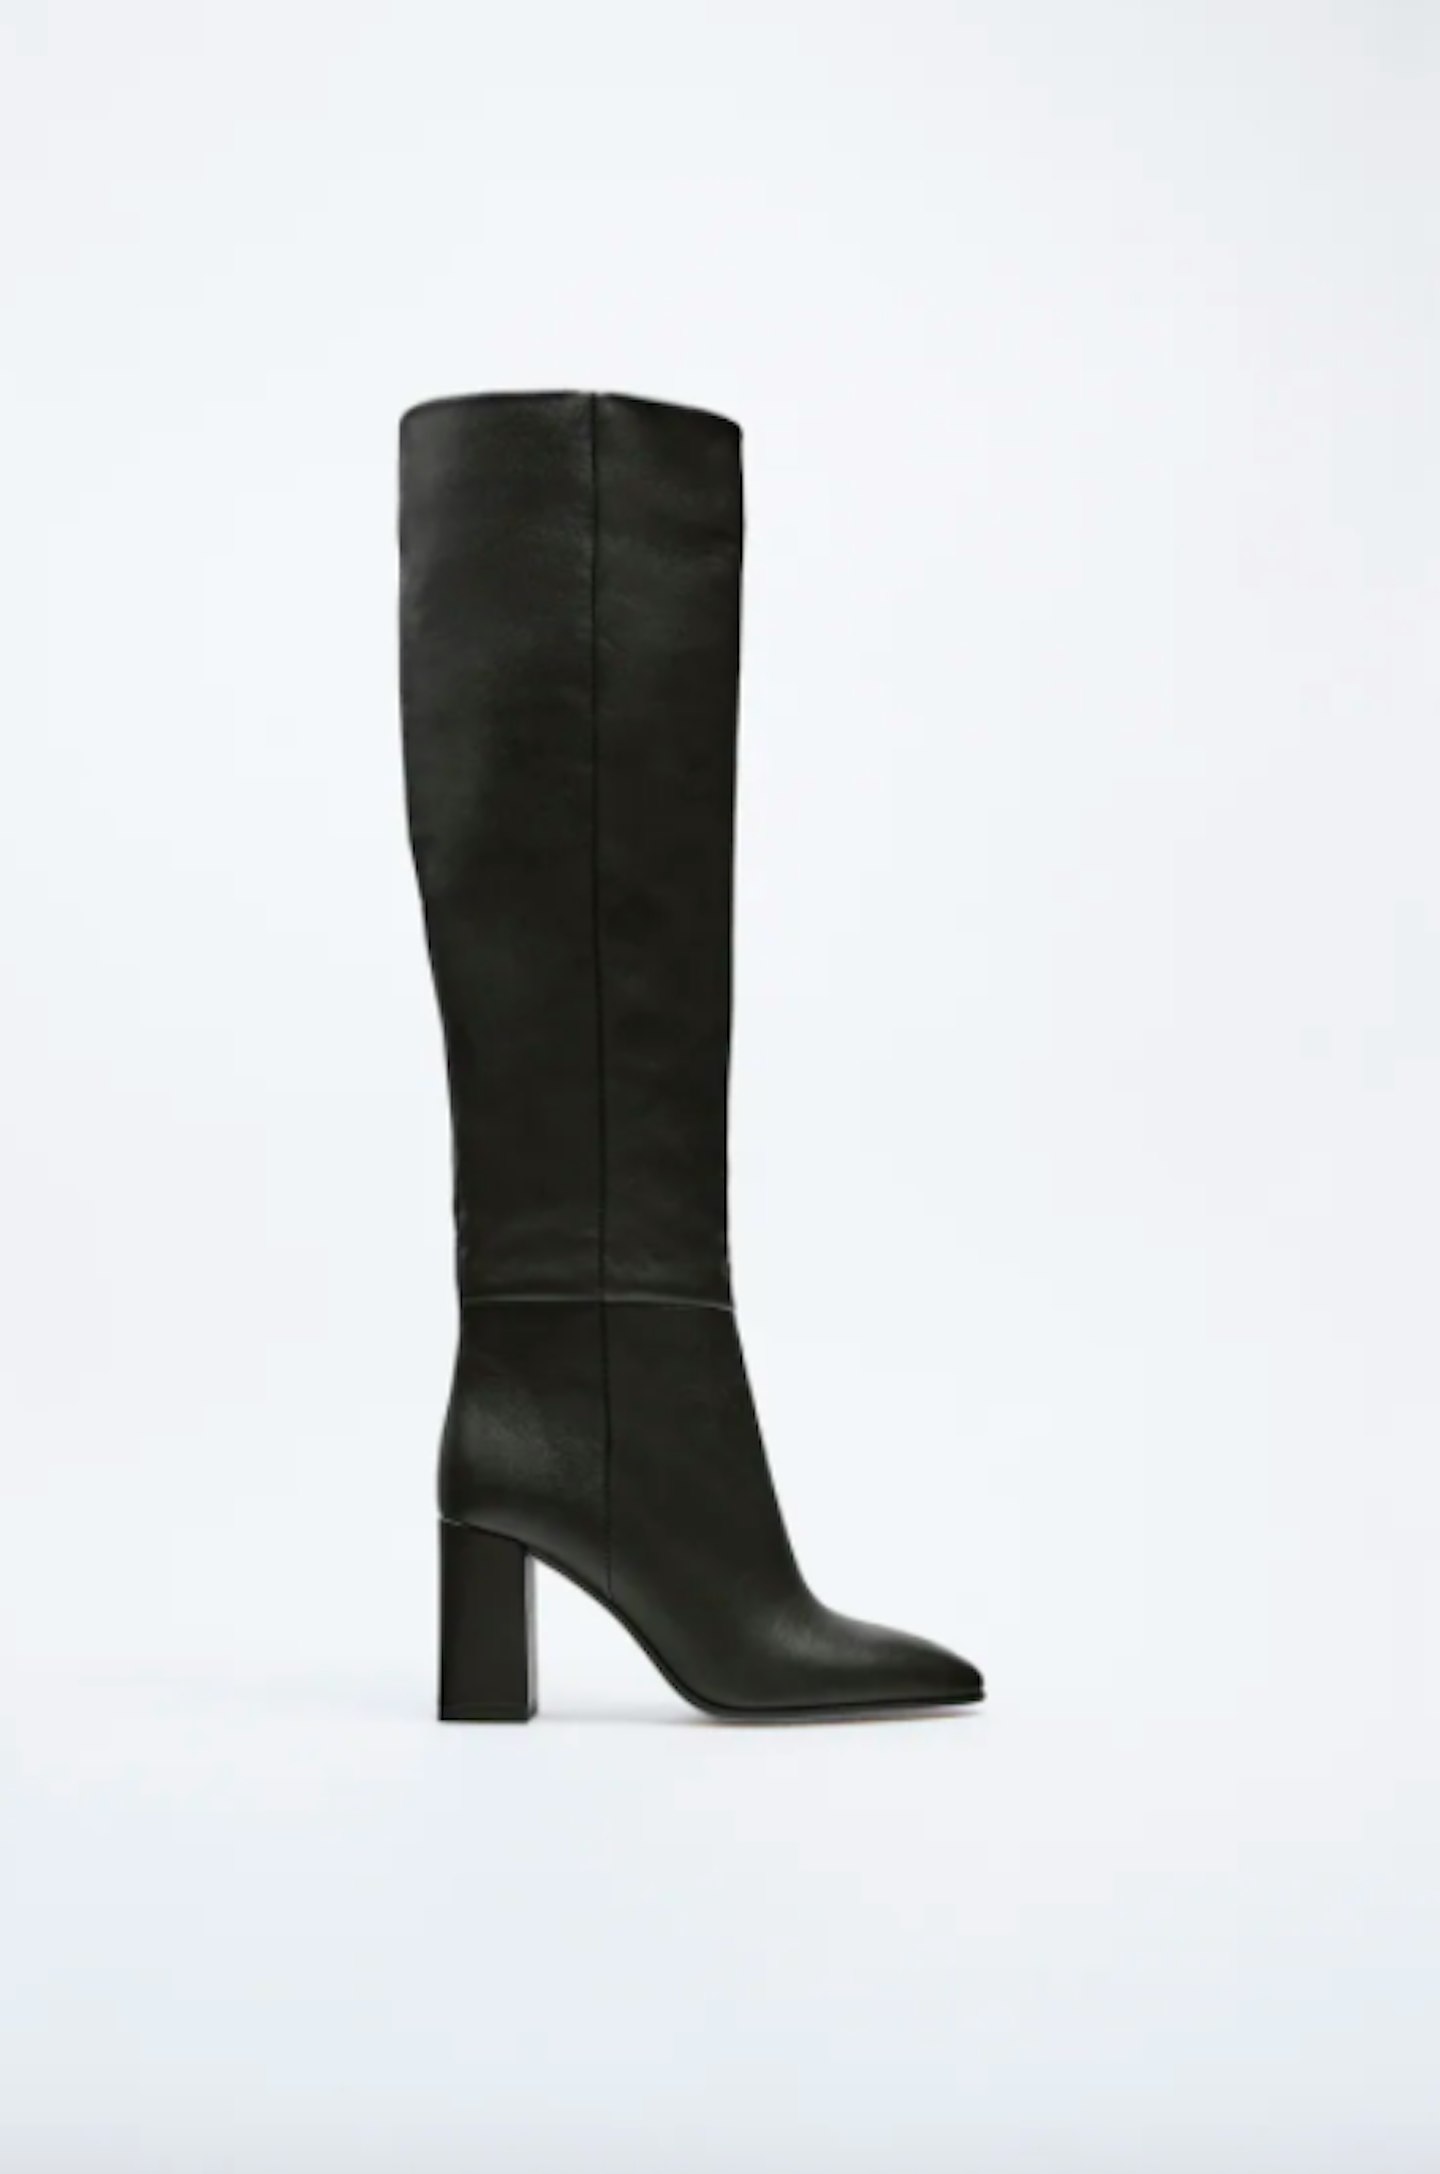 Leather High Heel Boots, £119